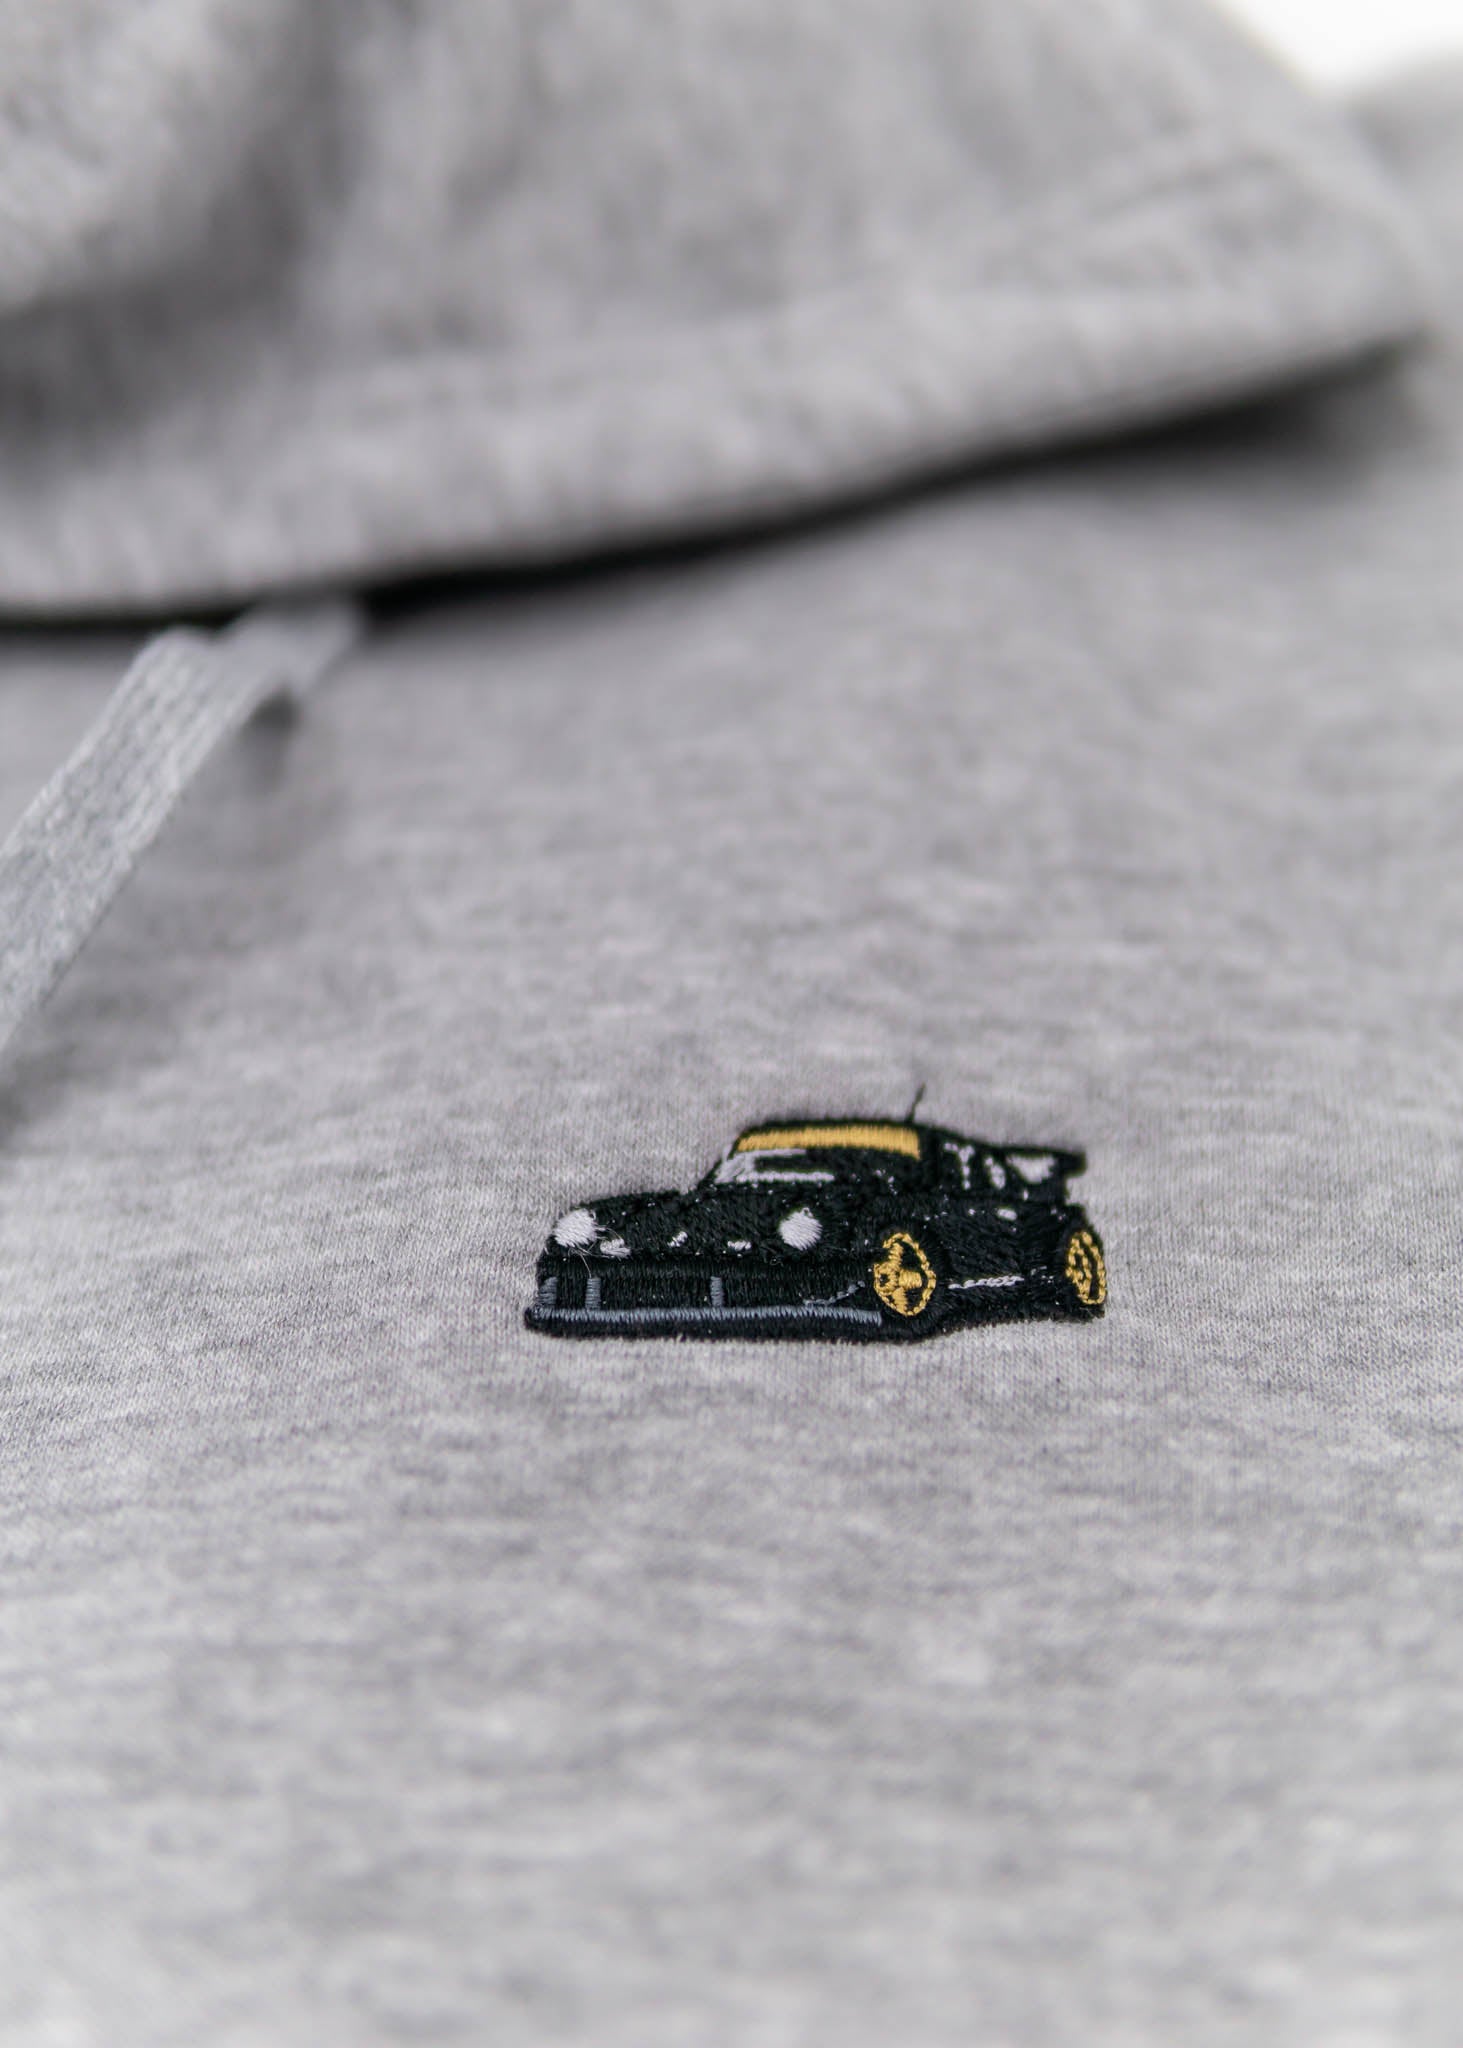 A grey Porsche unisex hoodie for men and women. Photo is a close up view of the sweater with an embroidered RWB Porsche 930 911 Turbo Akira Nakai Stella Artois. Fabric composition is cotton, polyester, and rayon. The material is very soft, stretchy, and non-transparent. The style of this hoodie is long sleeve, crewneck with a hood, hooded, with embroidery on the left chest.